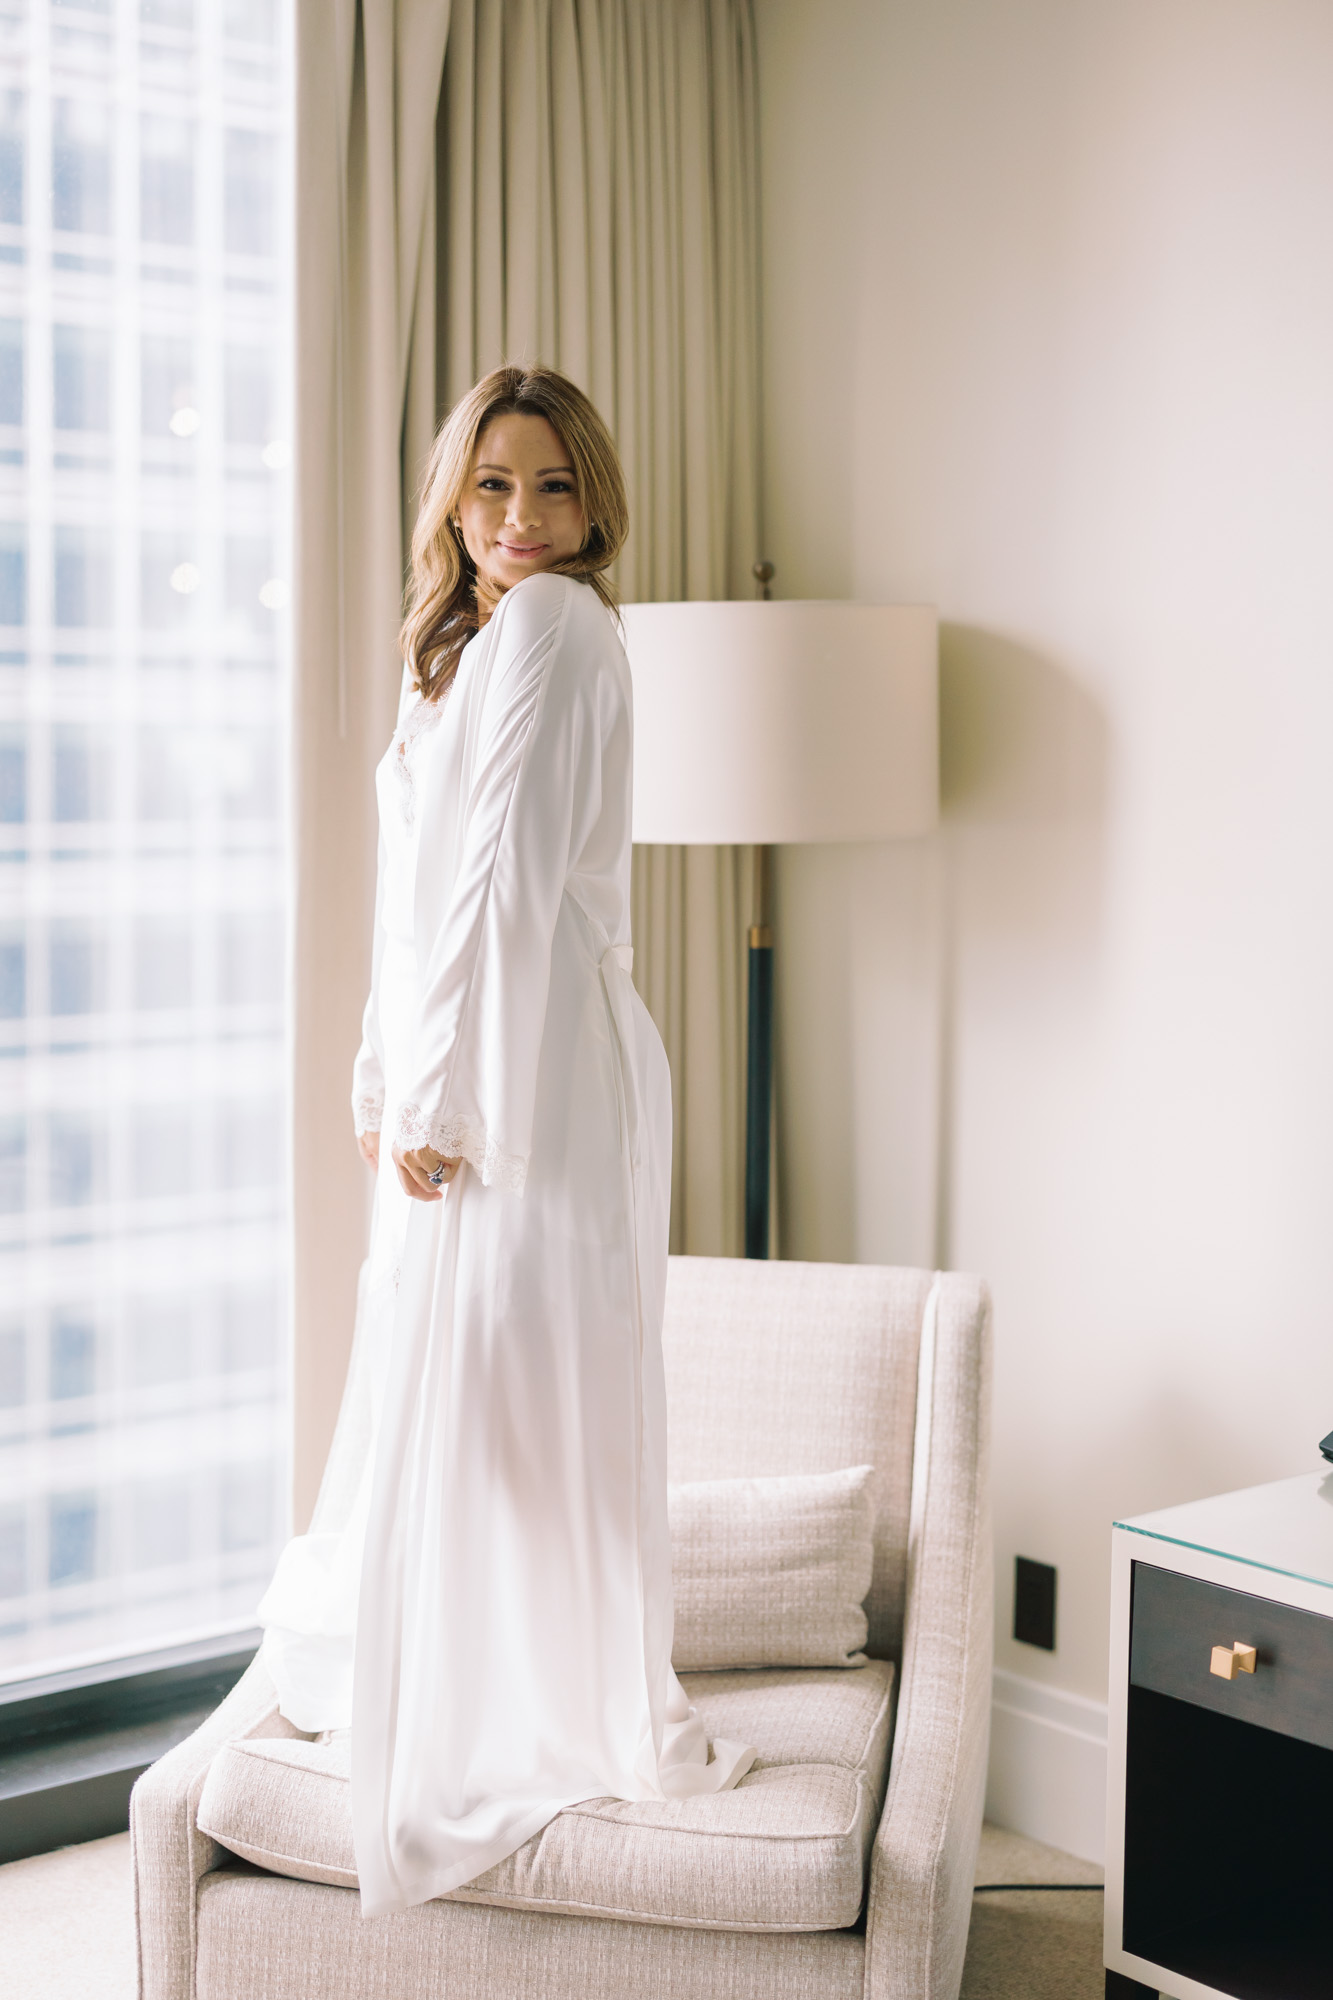 A woman poses for a boudoir photo while wearing a long, elegant robe.